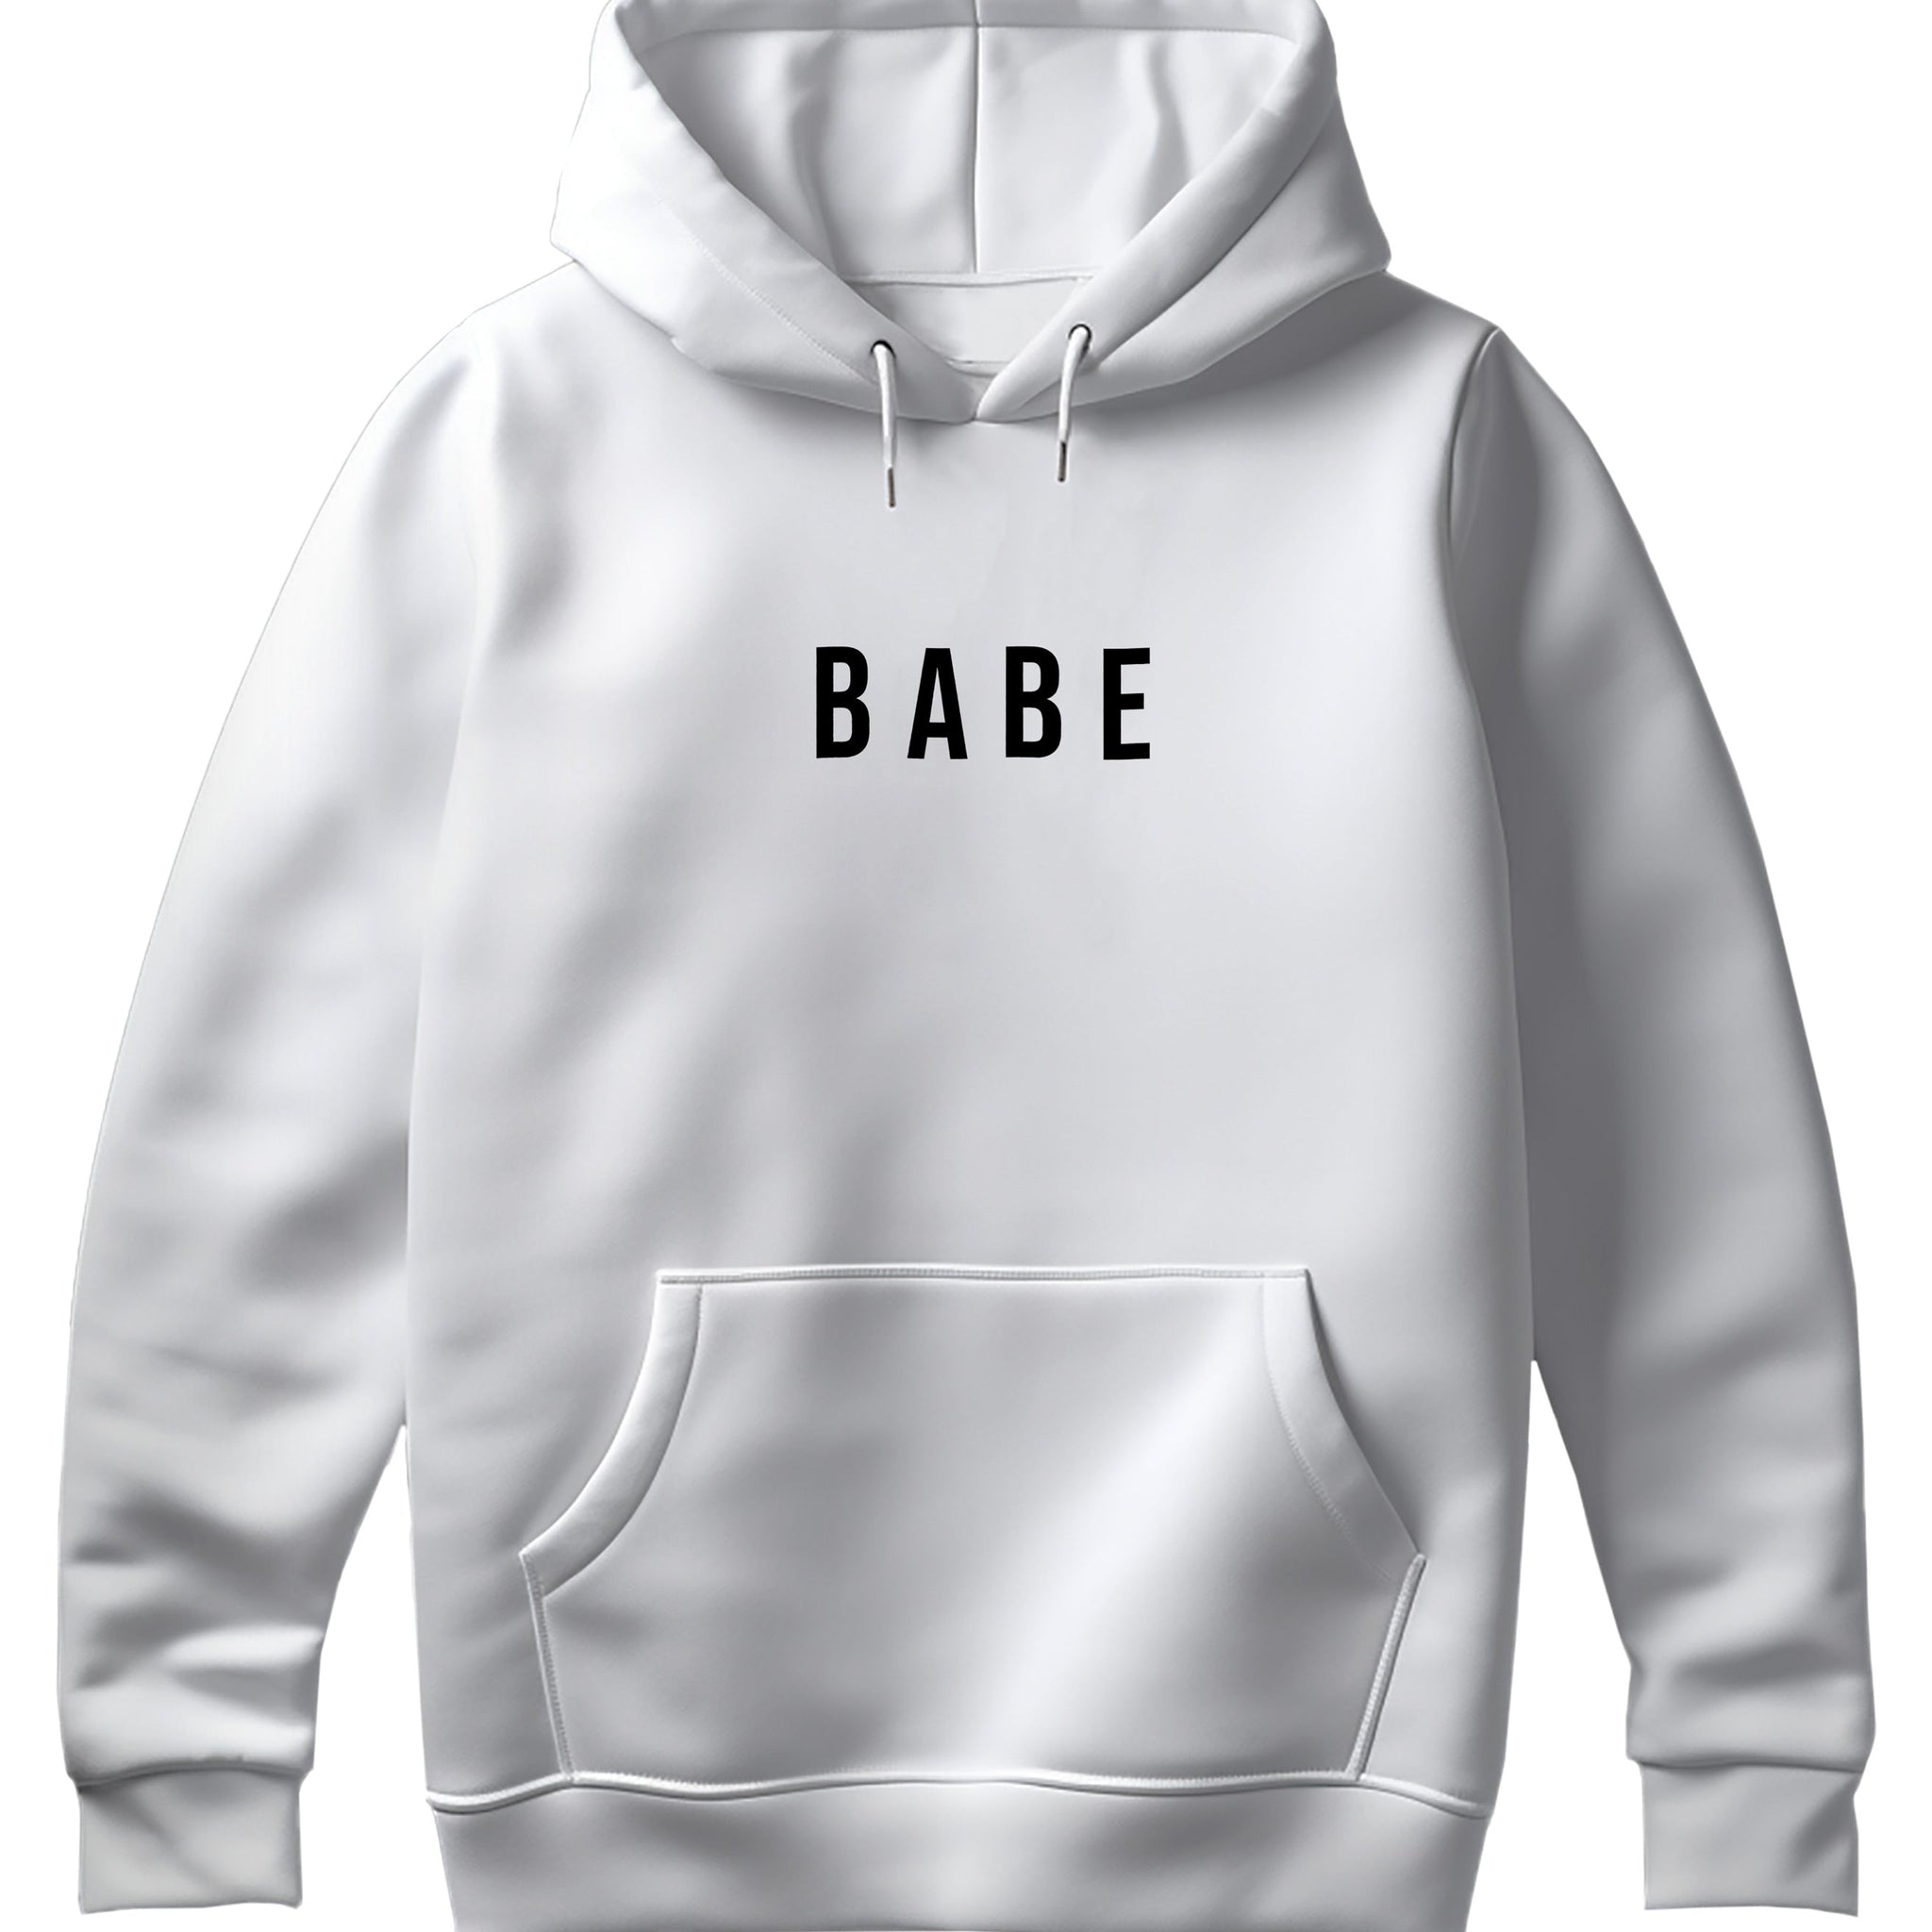 BABE Oversize Hoodie